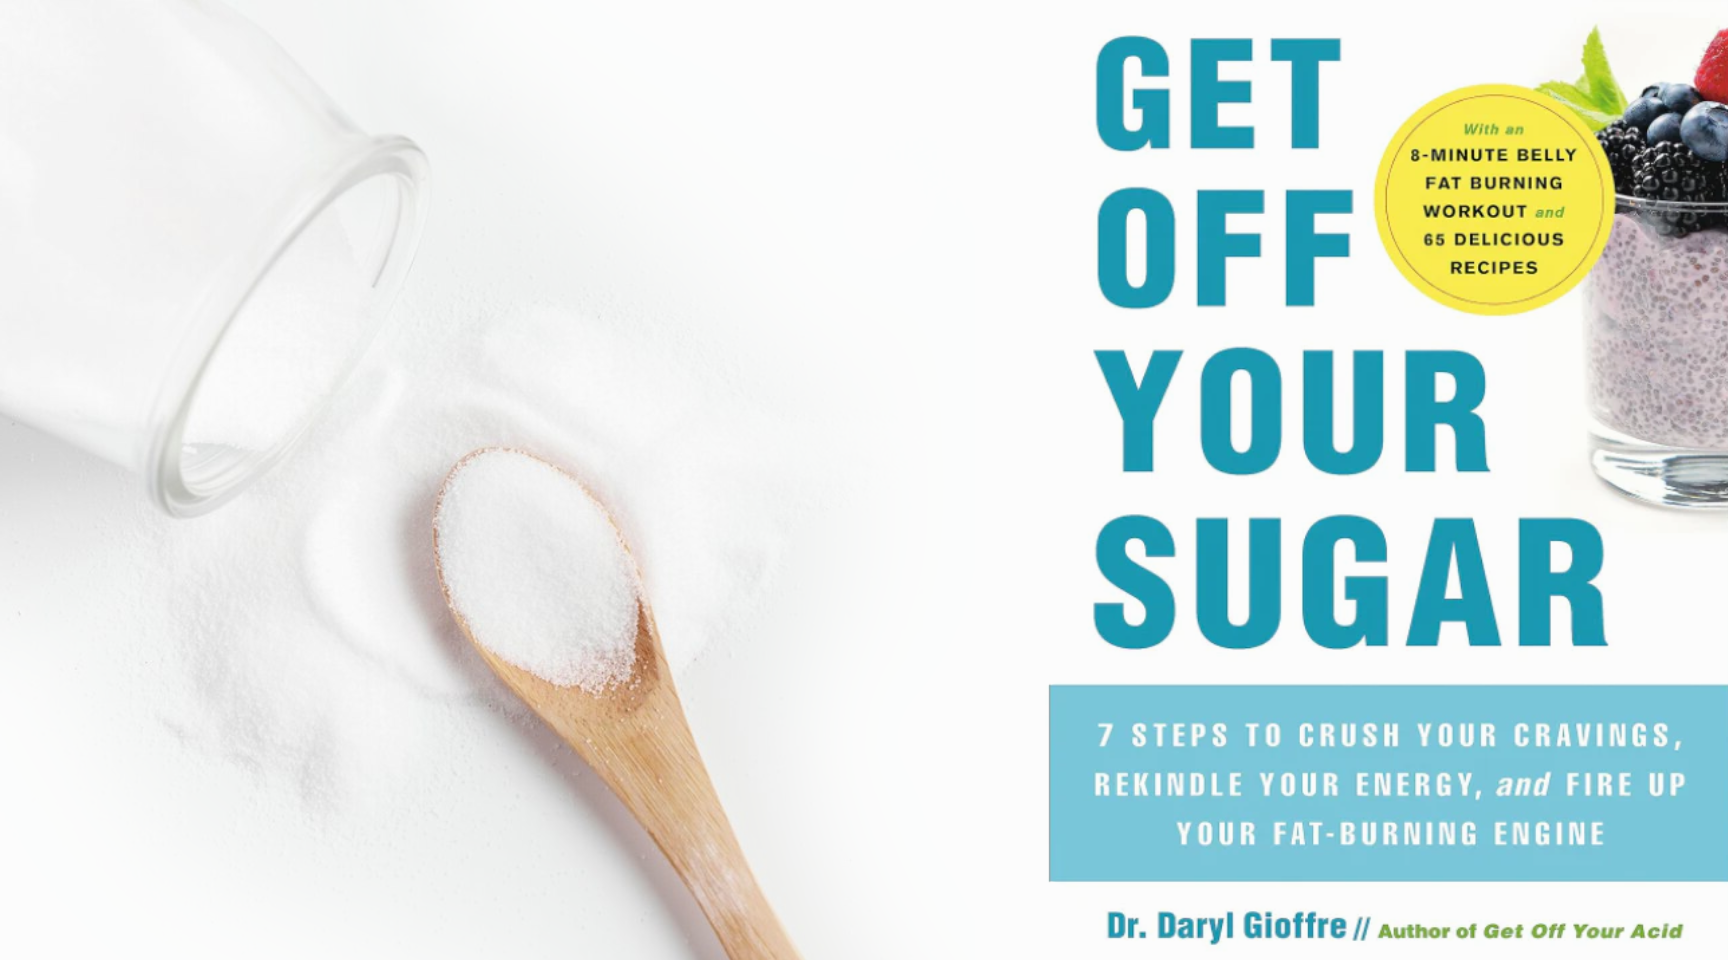 Get Off Your Sugar by Dr Daryl Gioffre: A Book Summary